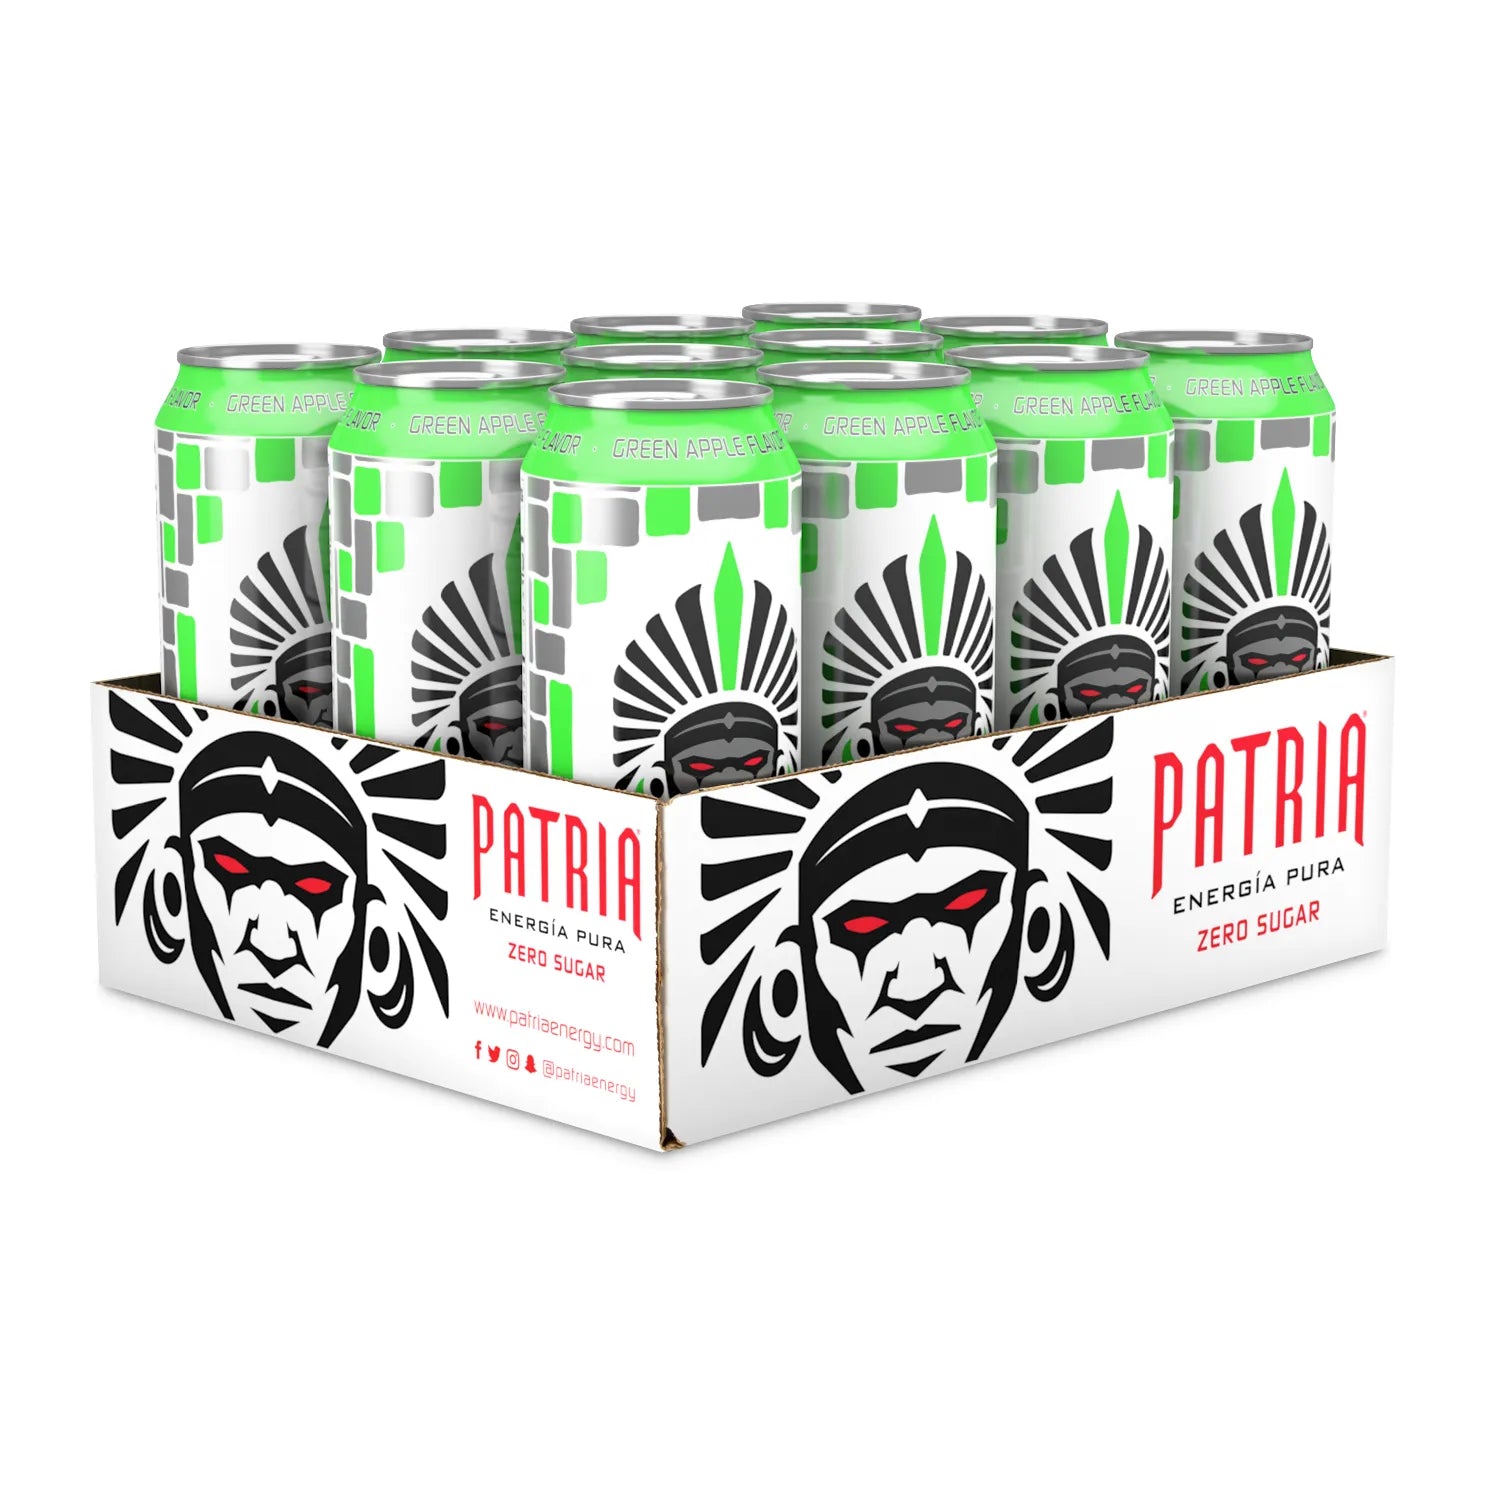 Patria Energy Drink - Green Apple - 16 oz Can (12 Pack Case)